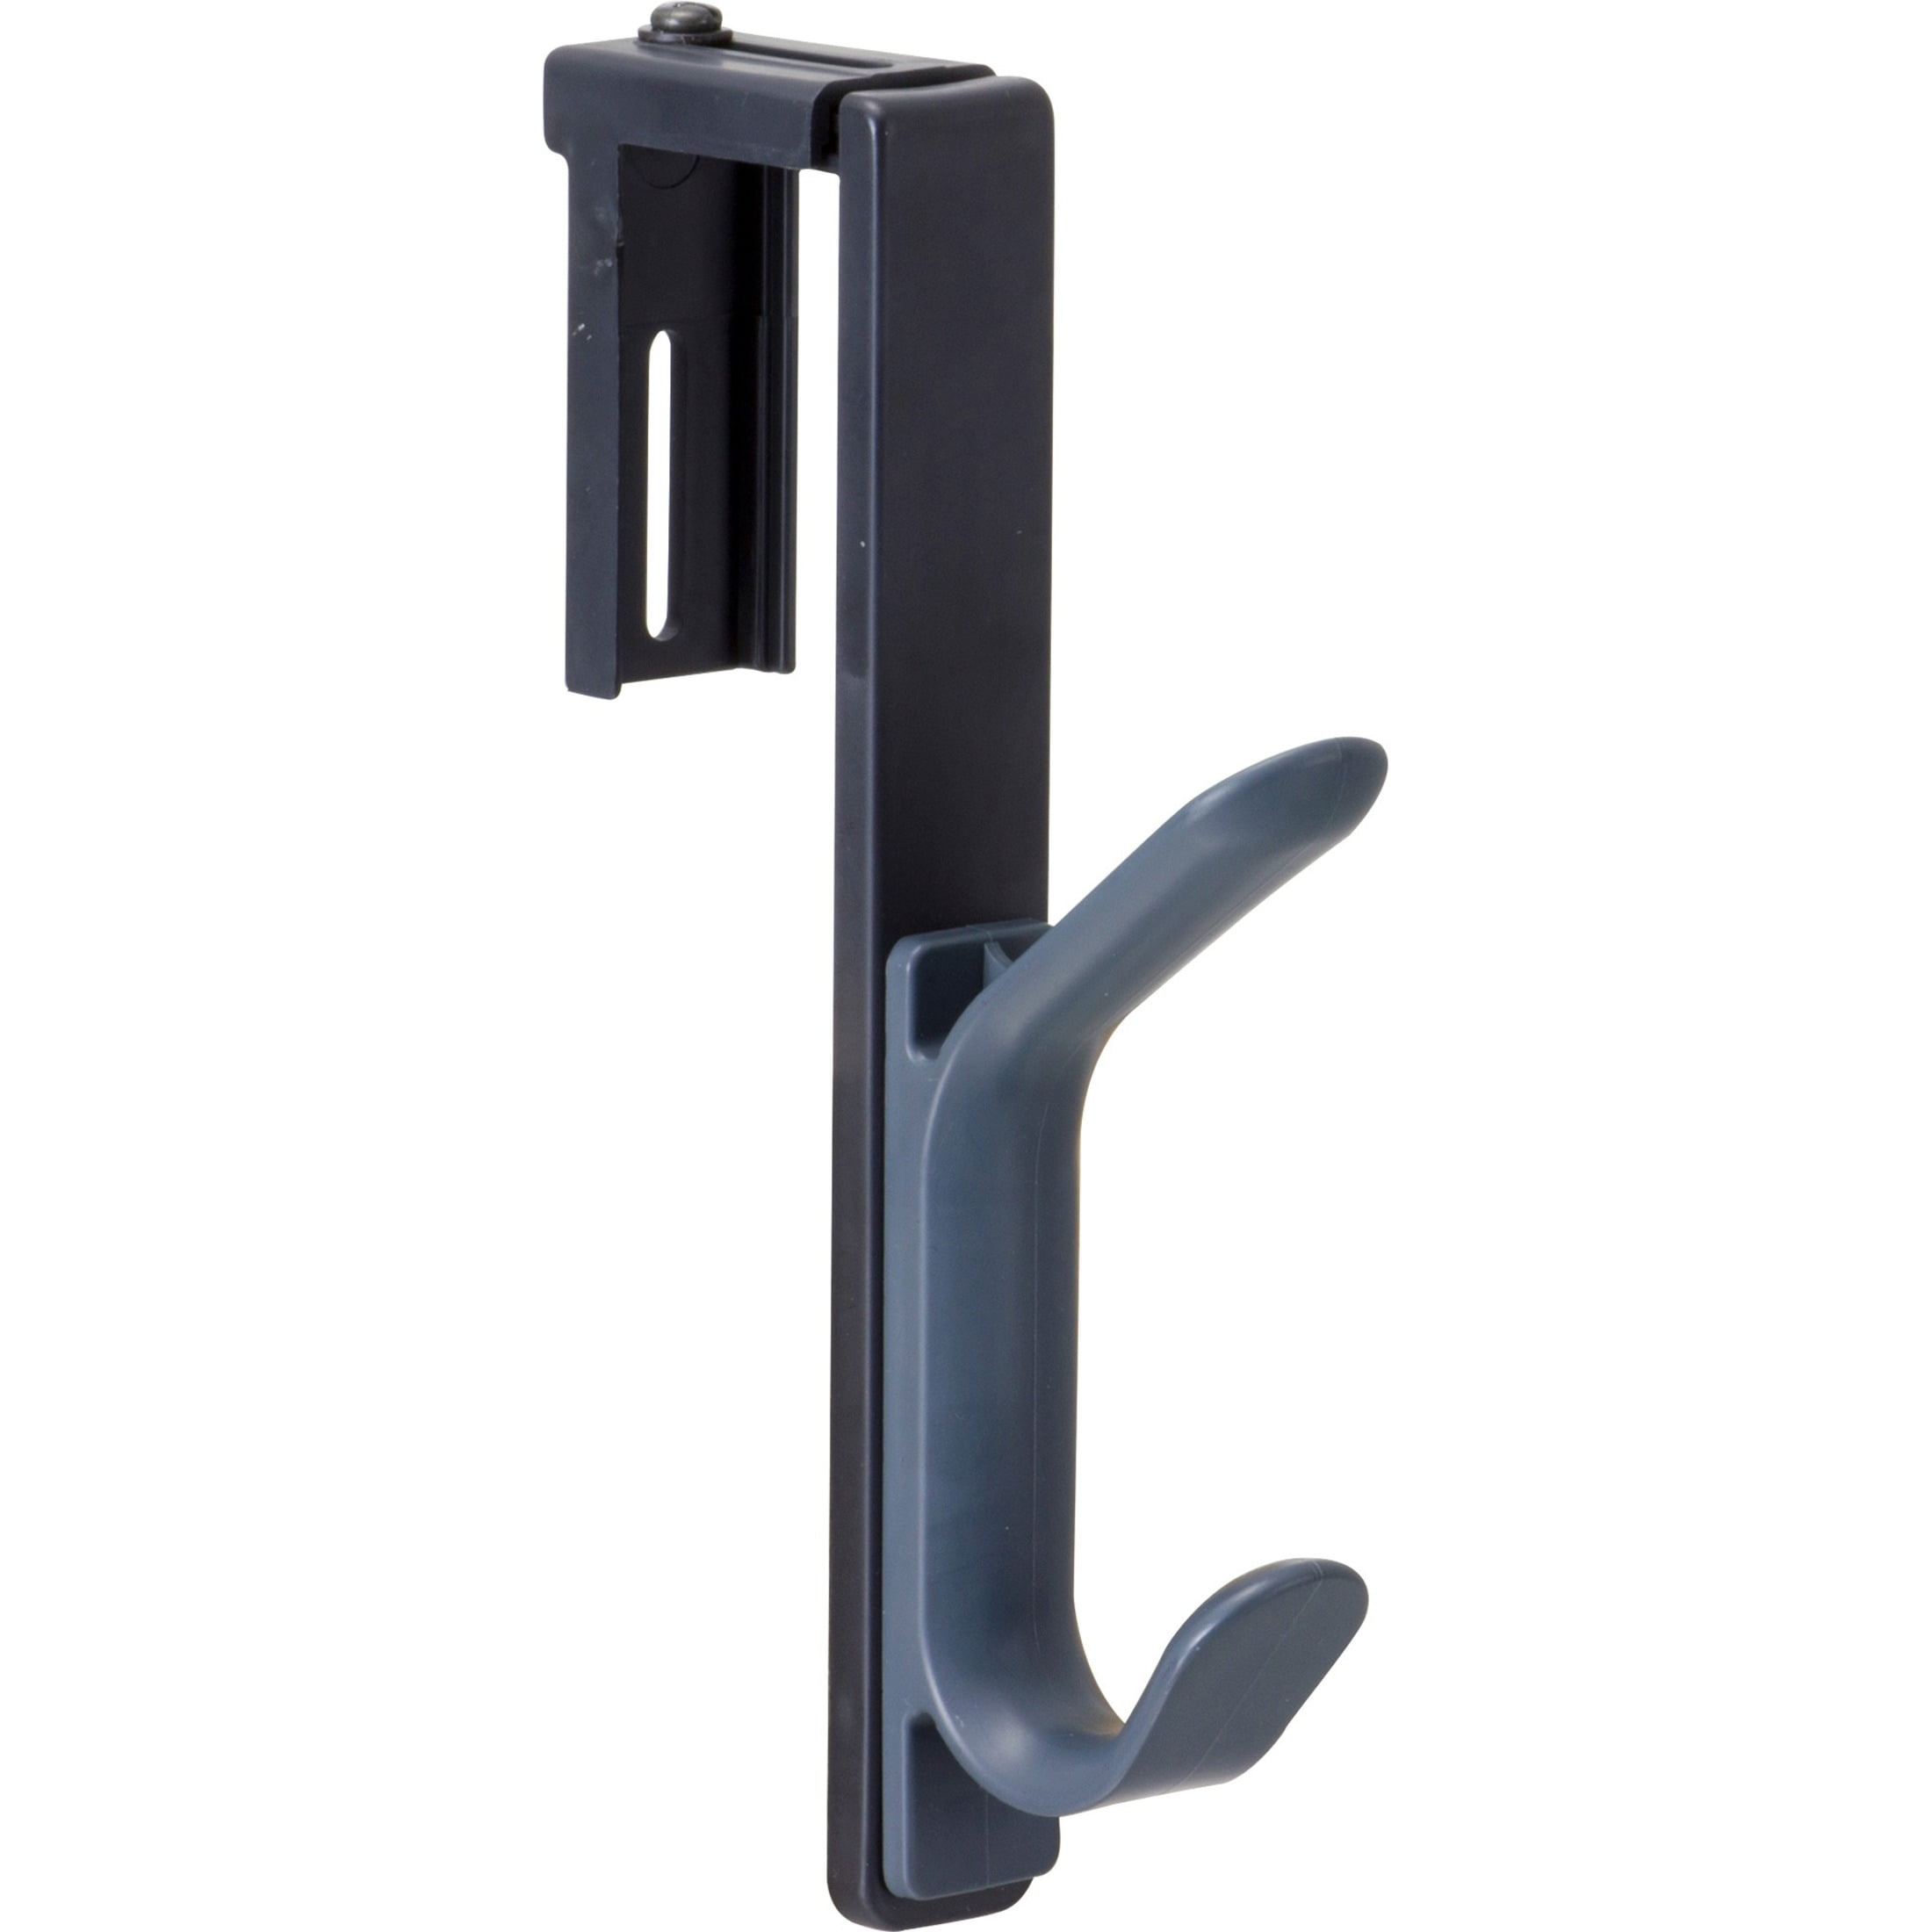 Officemate Double Coat Hooks for Cubicle Panels, Adjustable 1.25